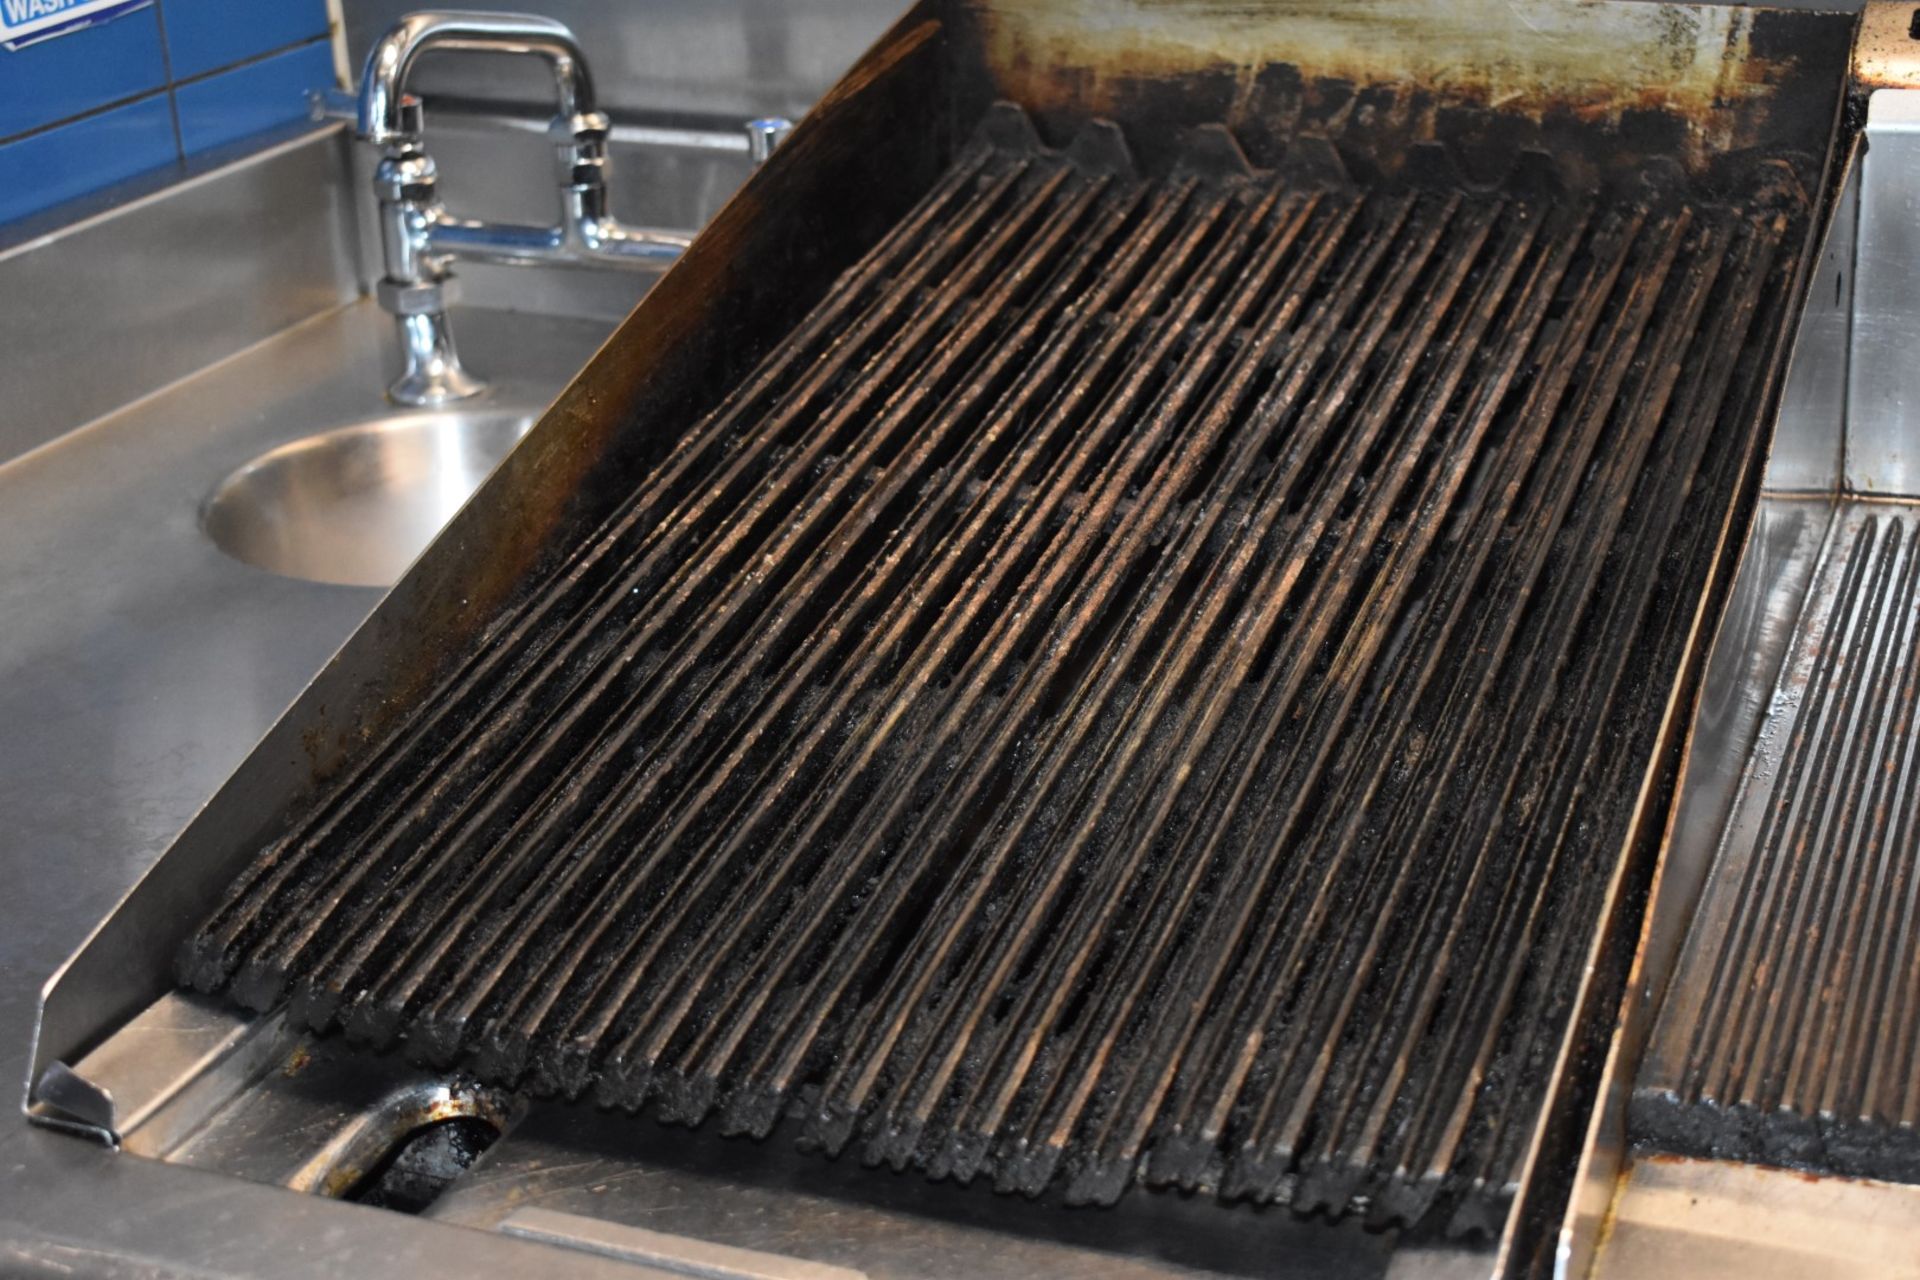 1 x Falcon Charcoal Gas Griddle - Size H41 x W40 x D78 cms - Ref: RB114 - CL558 - Location: - Image 4 of 4